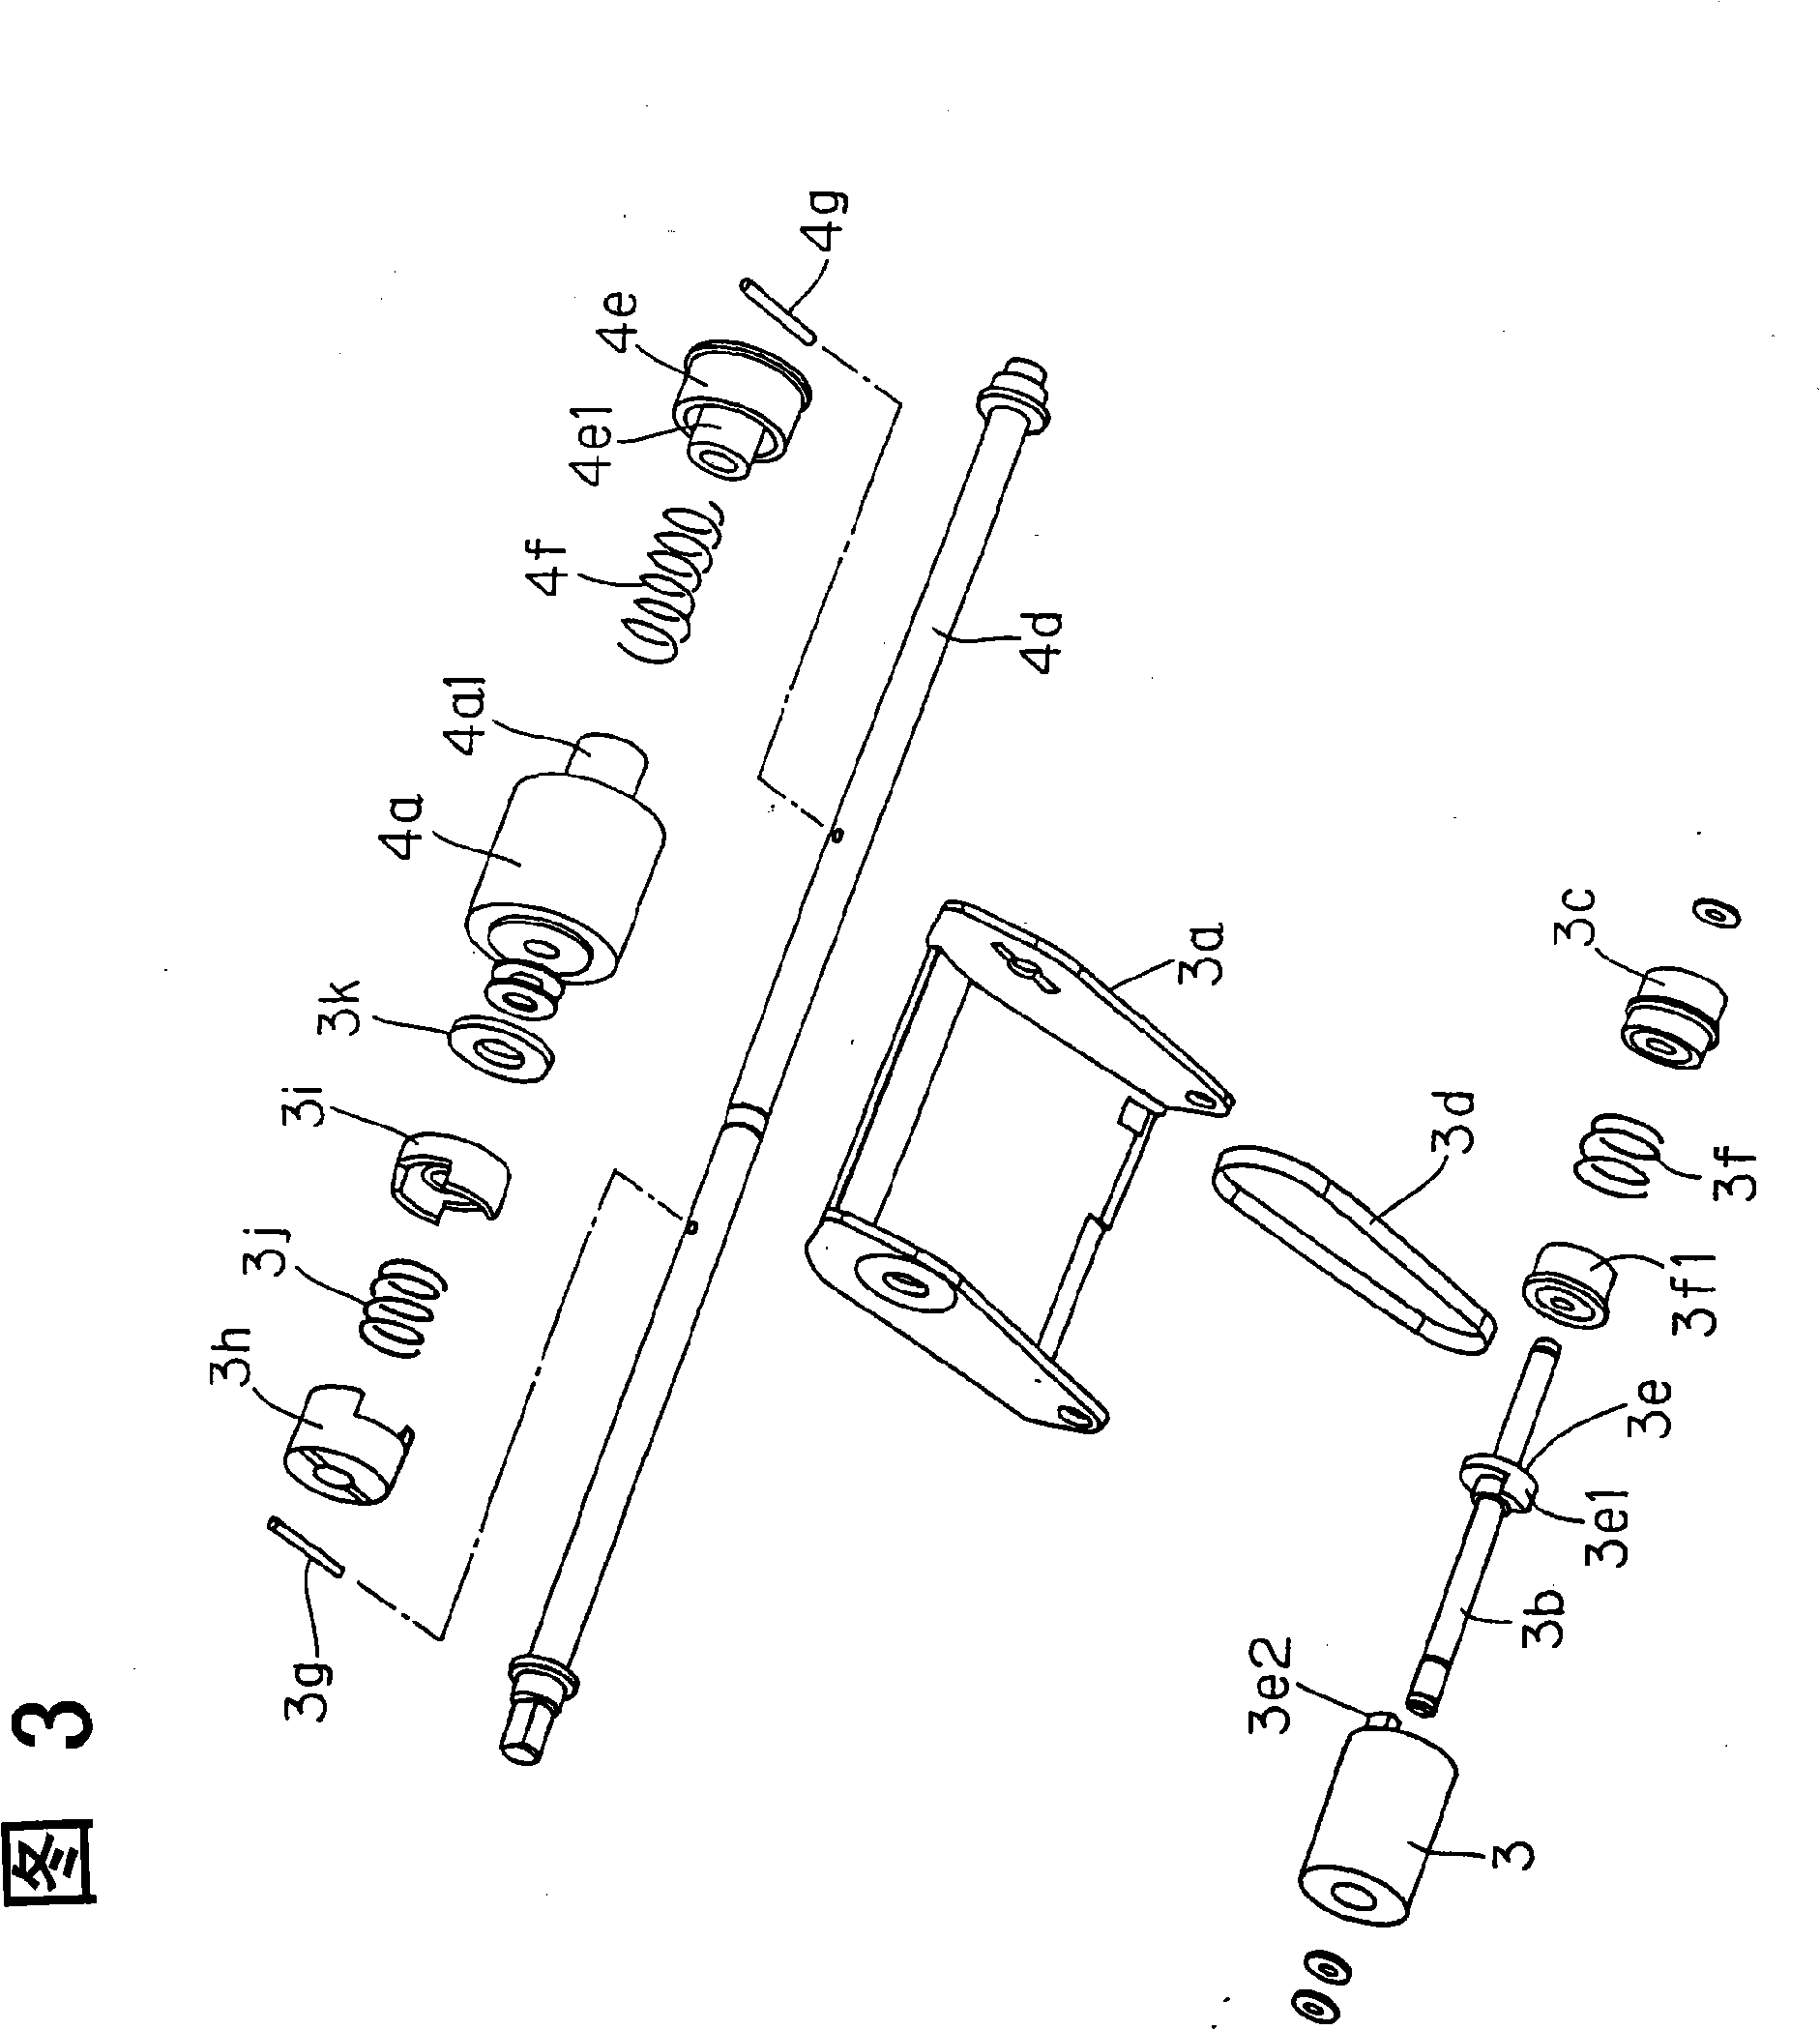 Paper feeding device and image scanning device